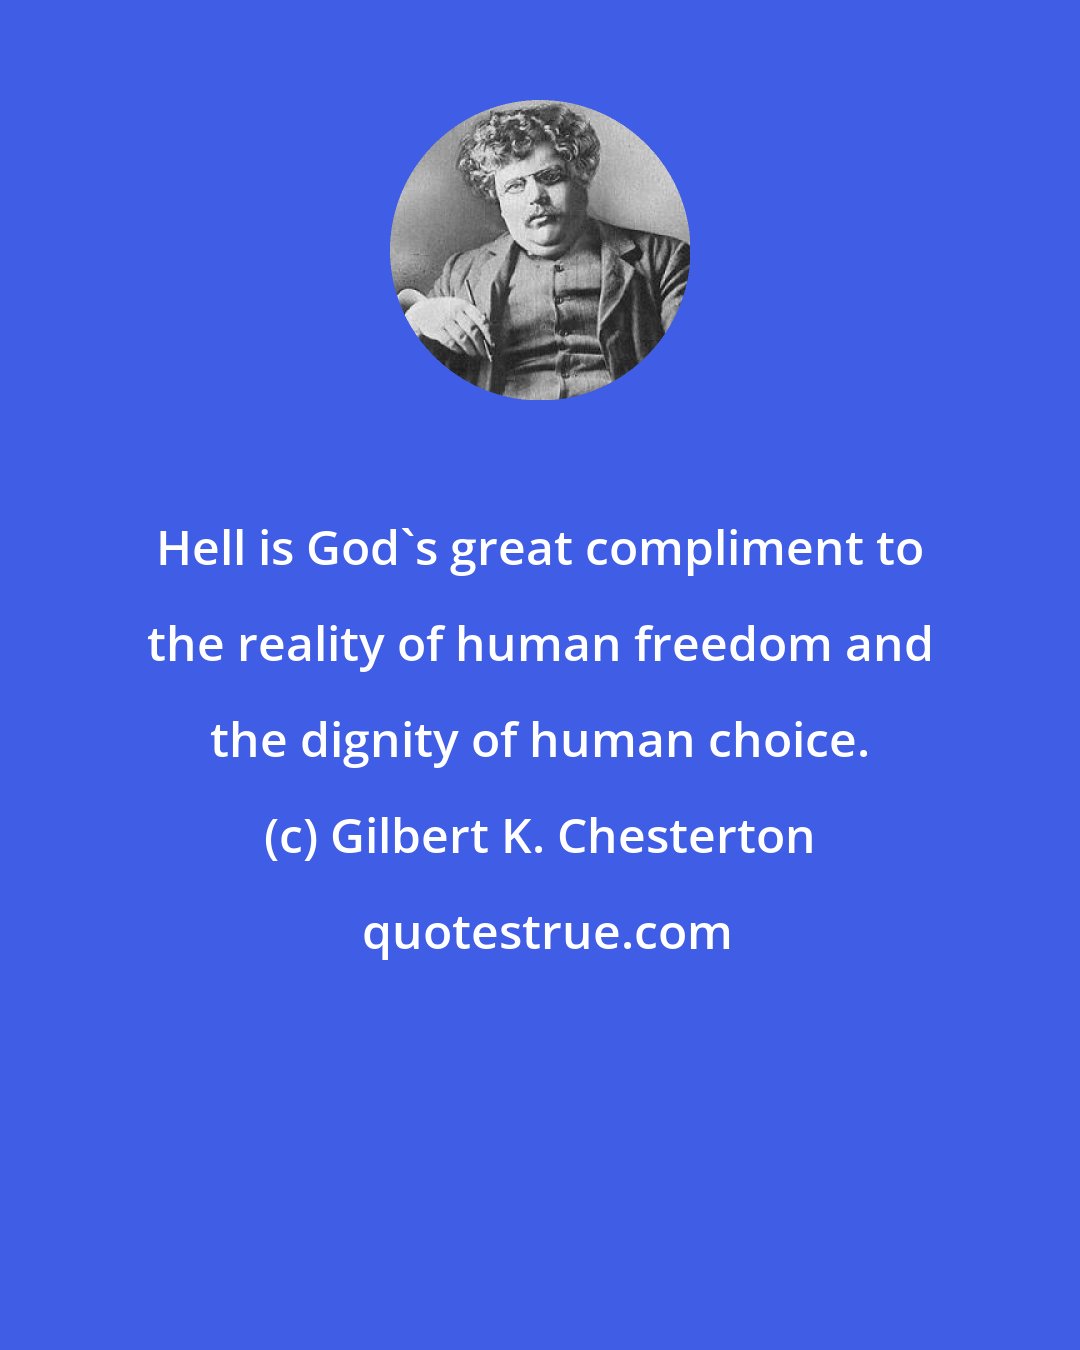 Gilbert K. Chesterton: Hell is God's great compliment to the reality of human freedom and the dignity of human choice.